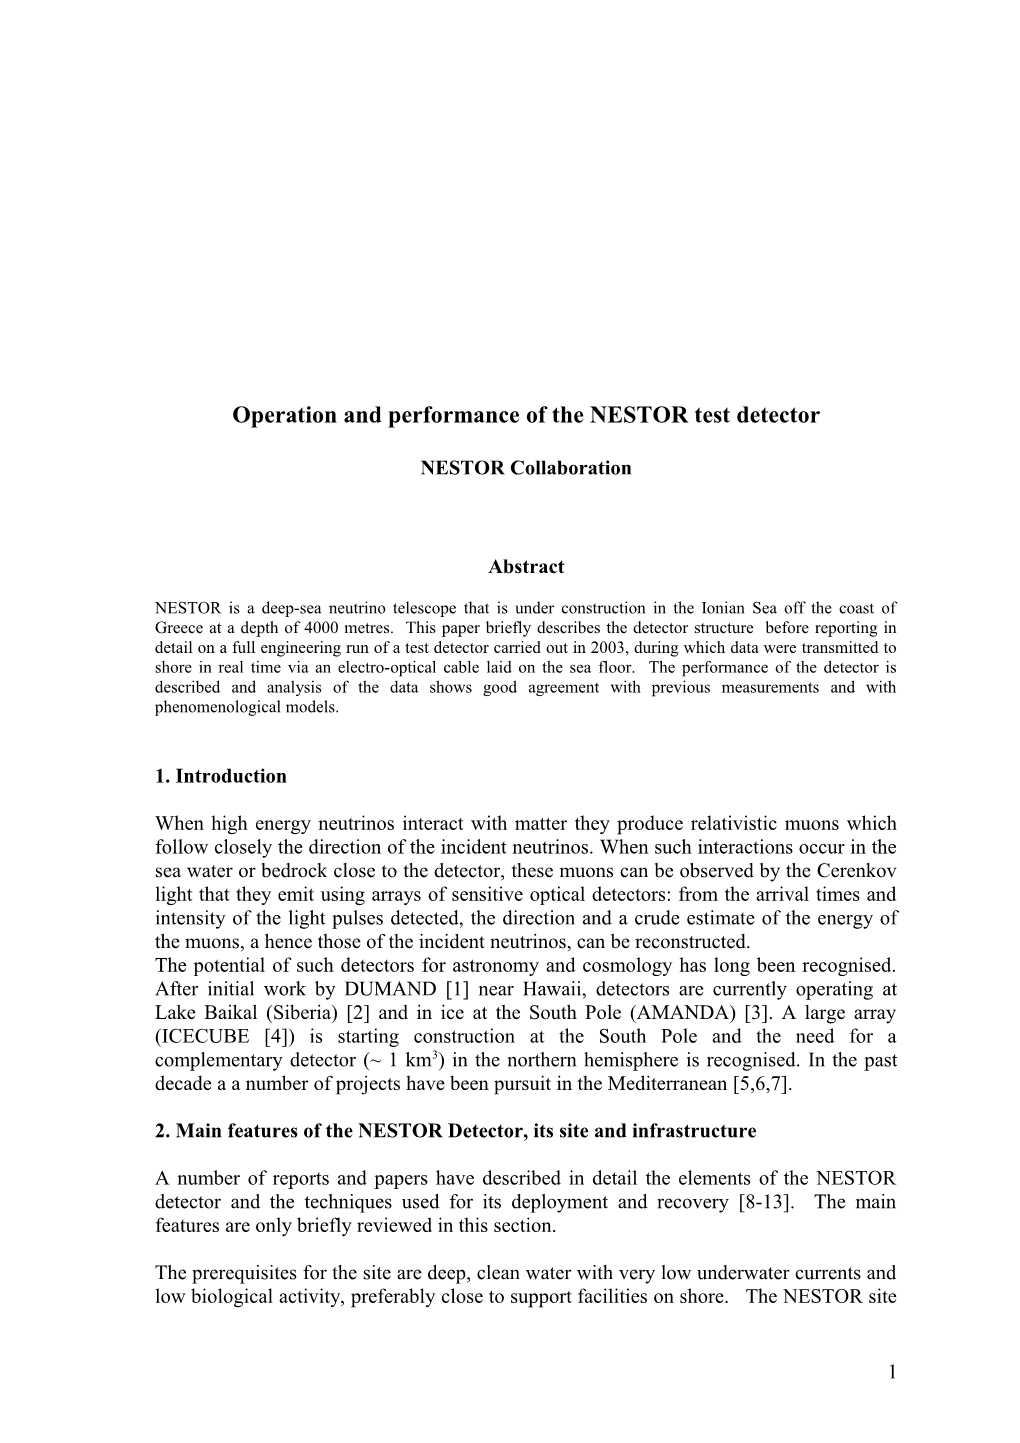 Operation and Performance of the NESTOR Test Detector